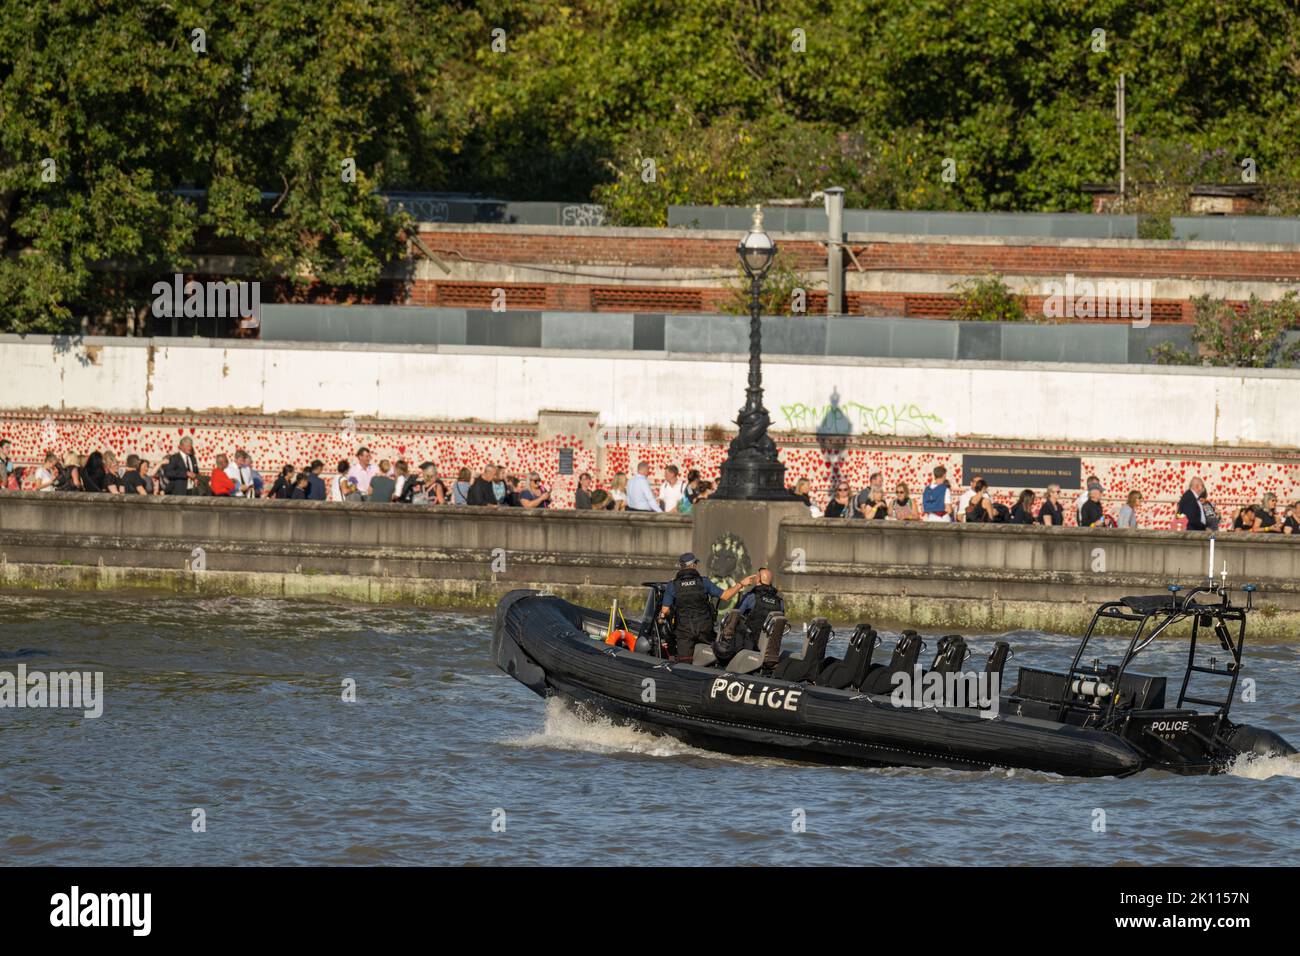 London, UK. 14th Sep, 2022. People queuing on Lambeth bridge to view the coffin of HM The Queen A police RIB (rigid inflatable boat) on the Thames with queue in the background)  Credit: Ian Davidson/Alamy Live News Stock Photo